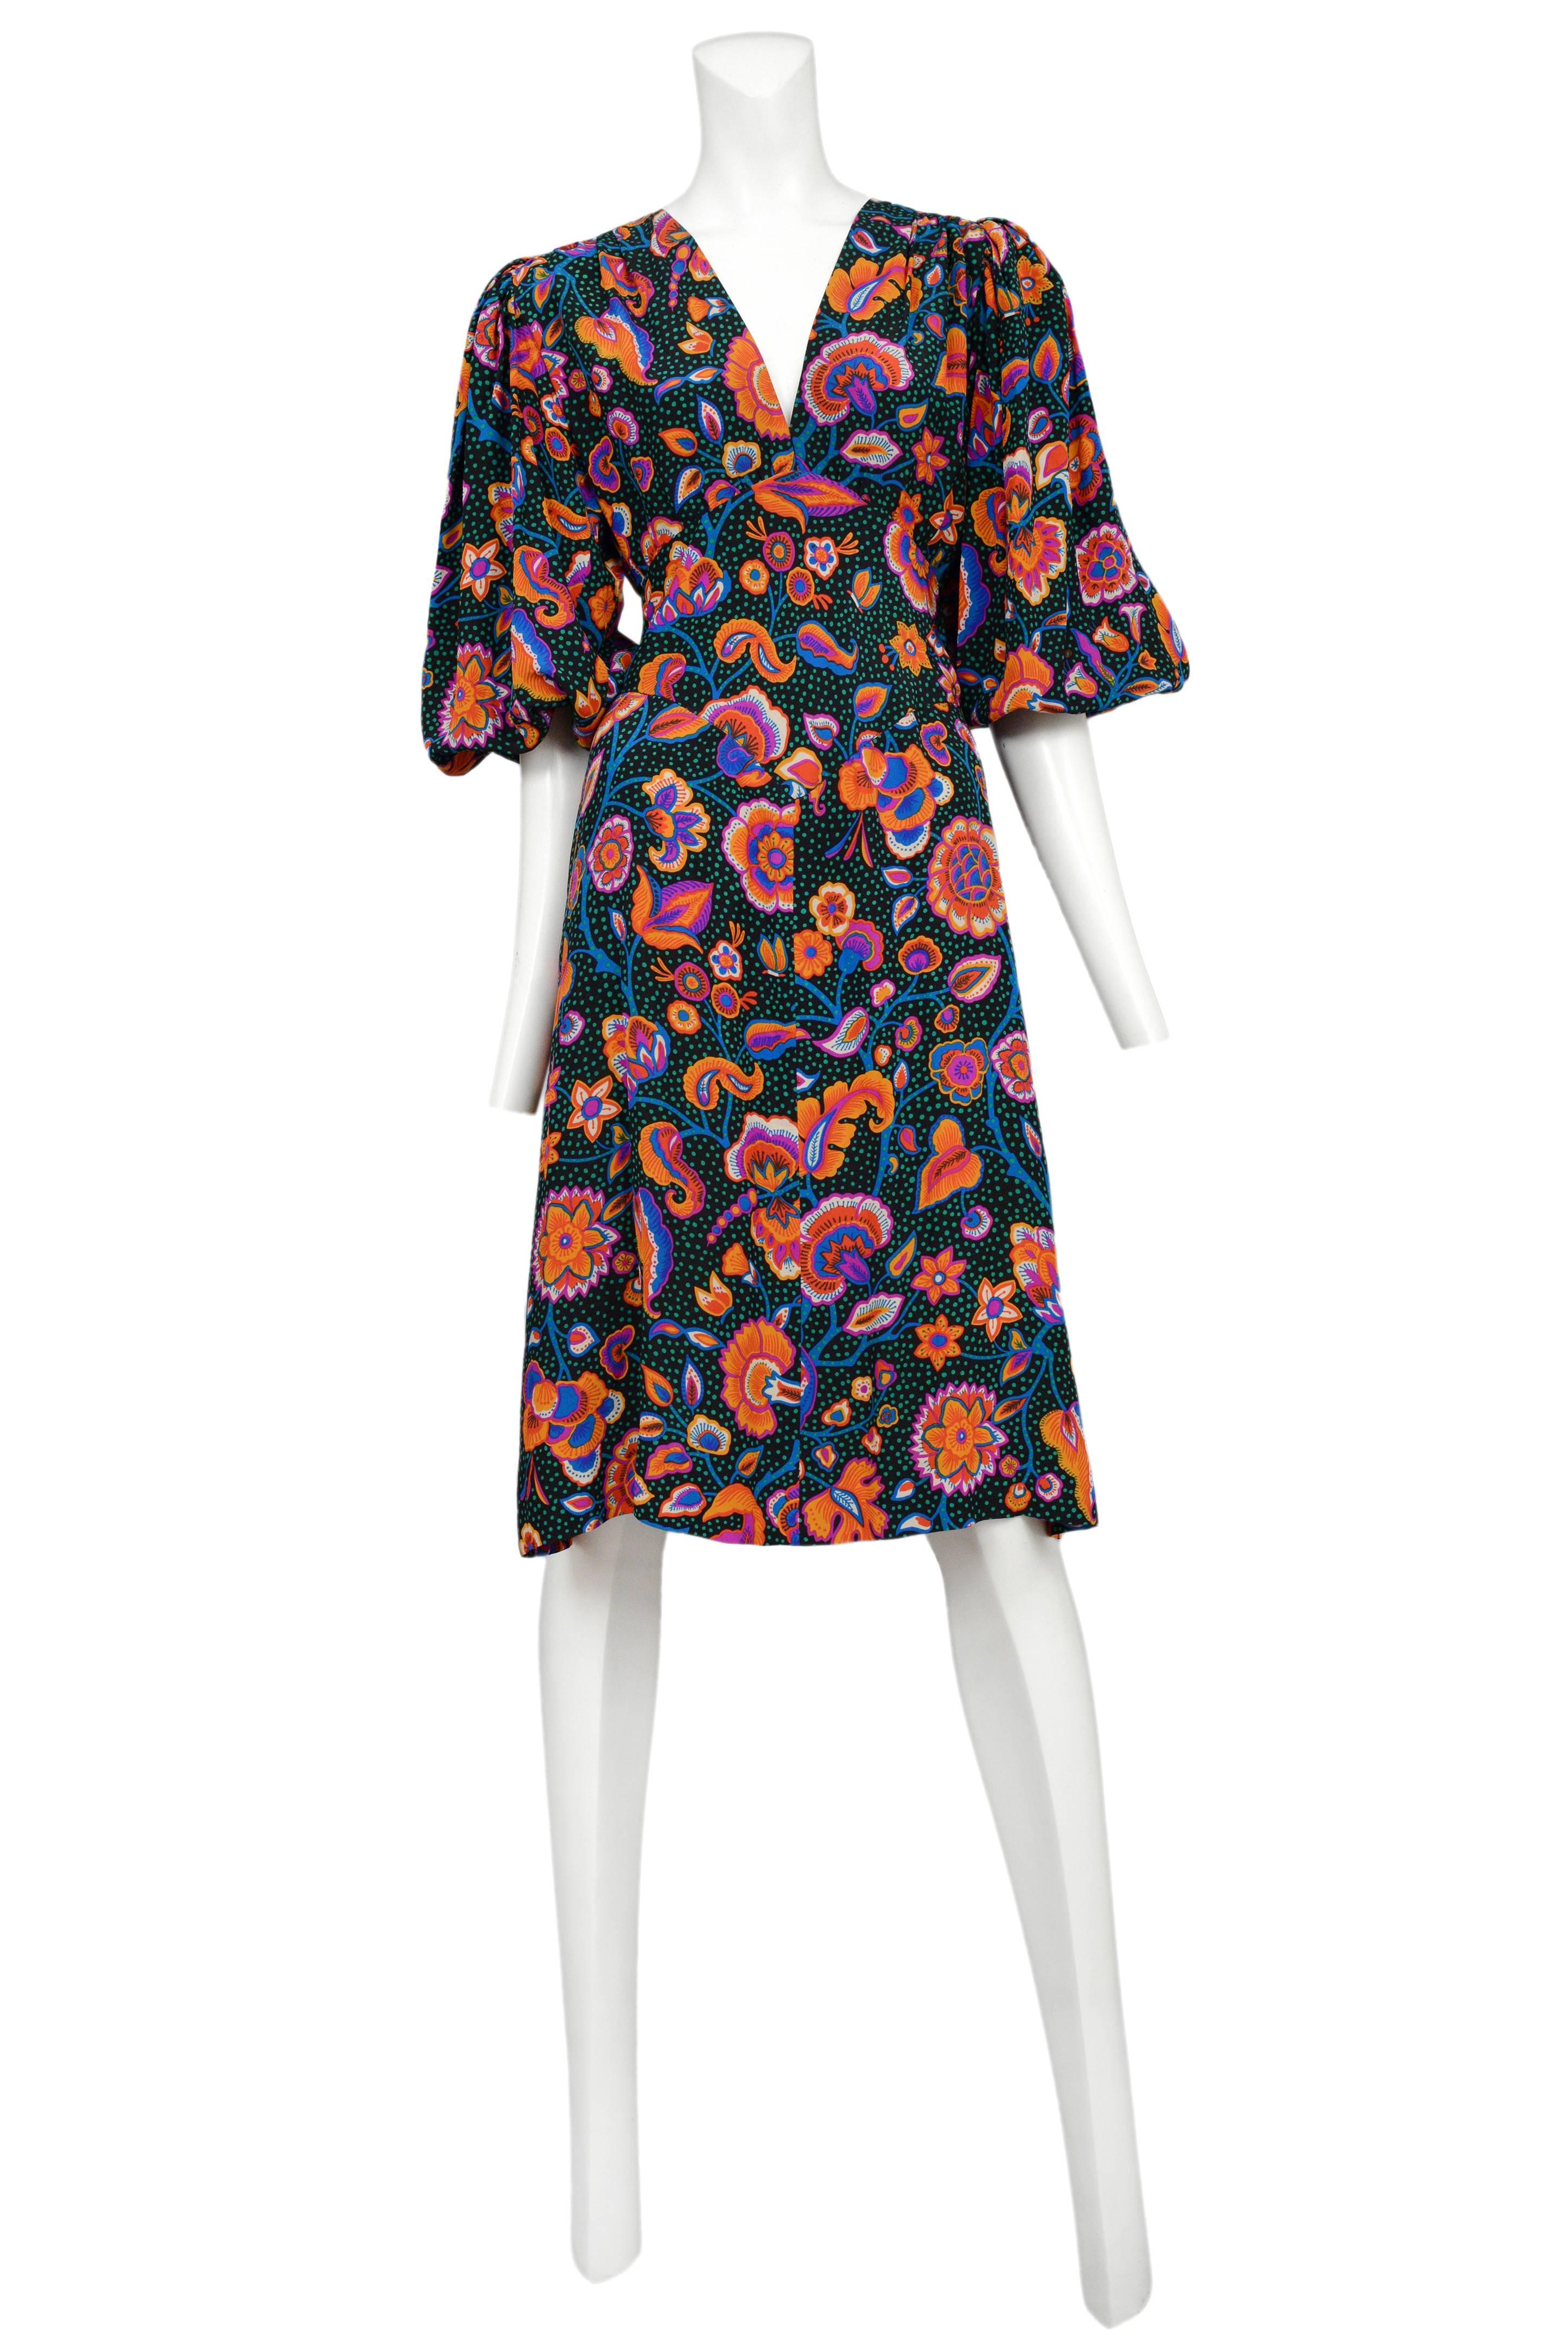 Vintage Yves Saint Laurent silk day dress featuring peasant style sleeves, a v-neckline, a tie at the center back waist and an allover orange, pink and blue flower print interspersed with green dots.
Please inquire for additional images.